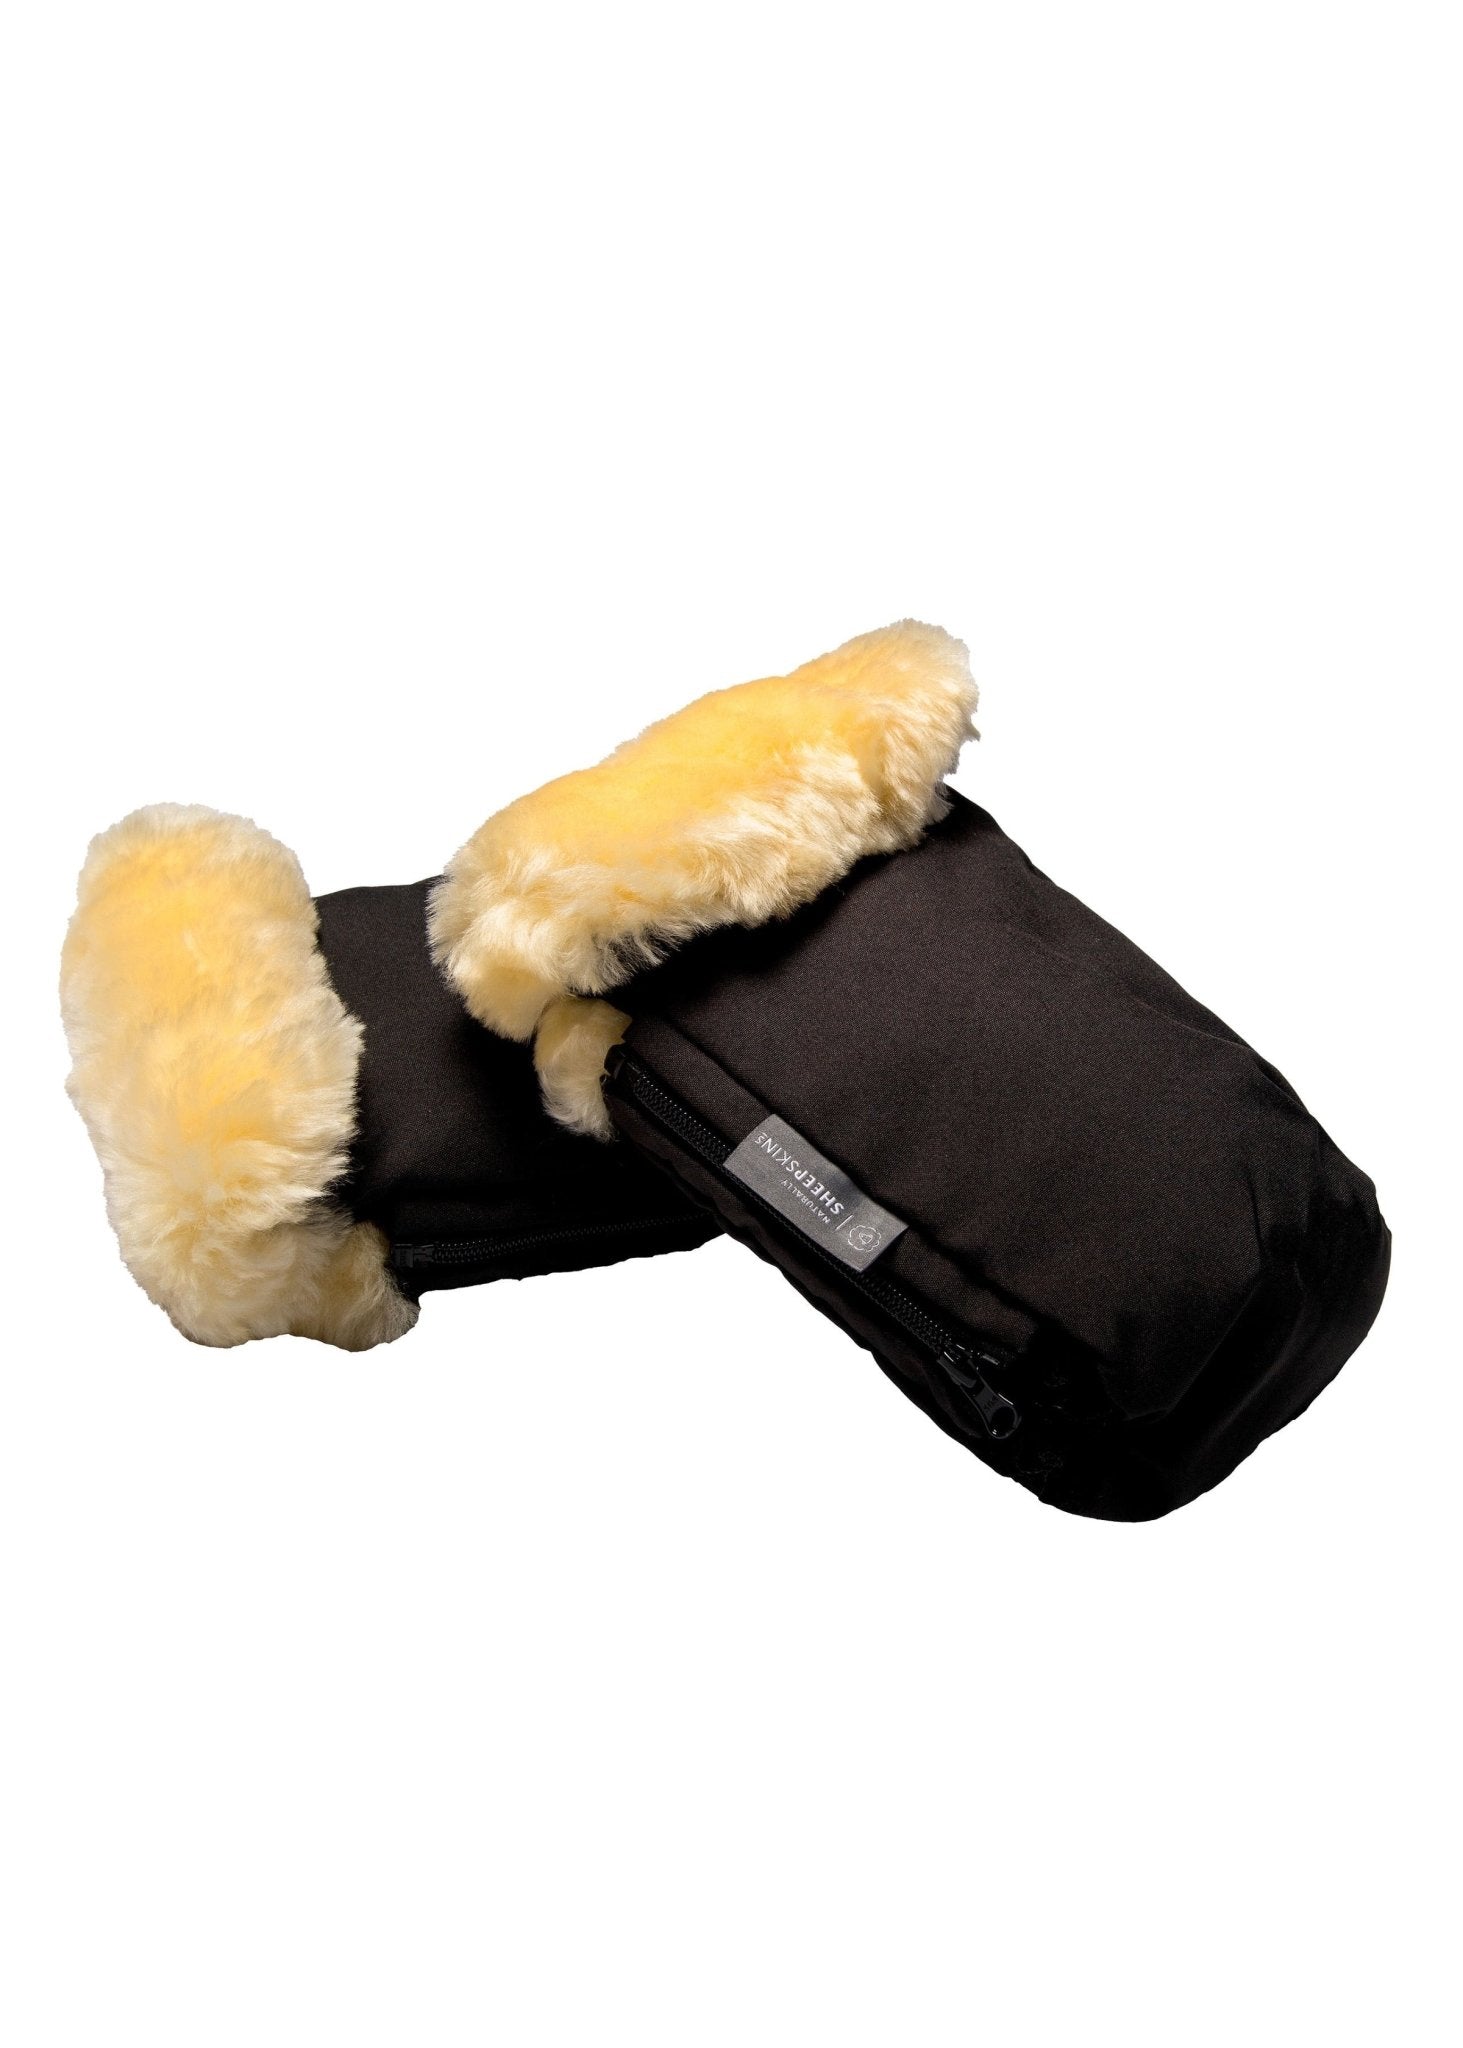 Deluxe Stroller Mittens Black - Naturally Sheepskins product at angle